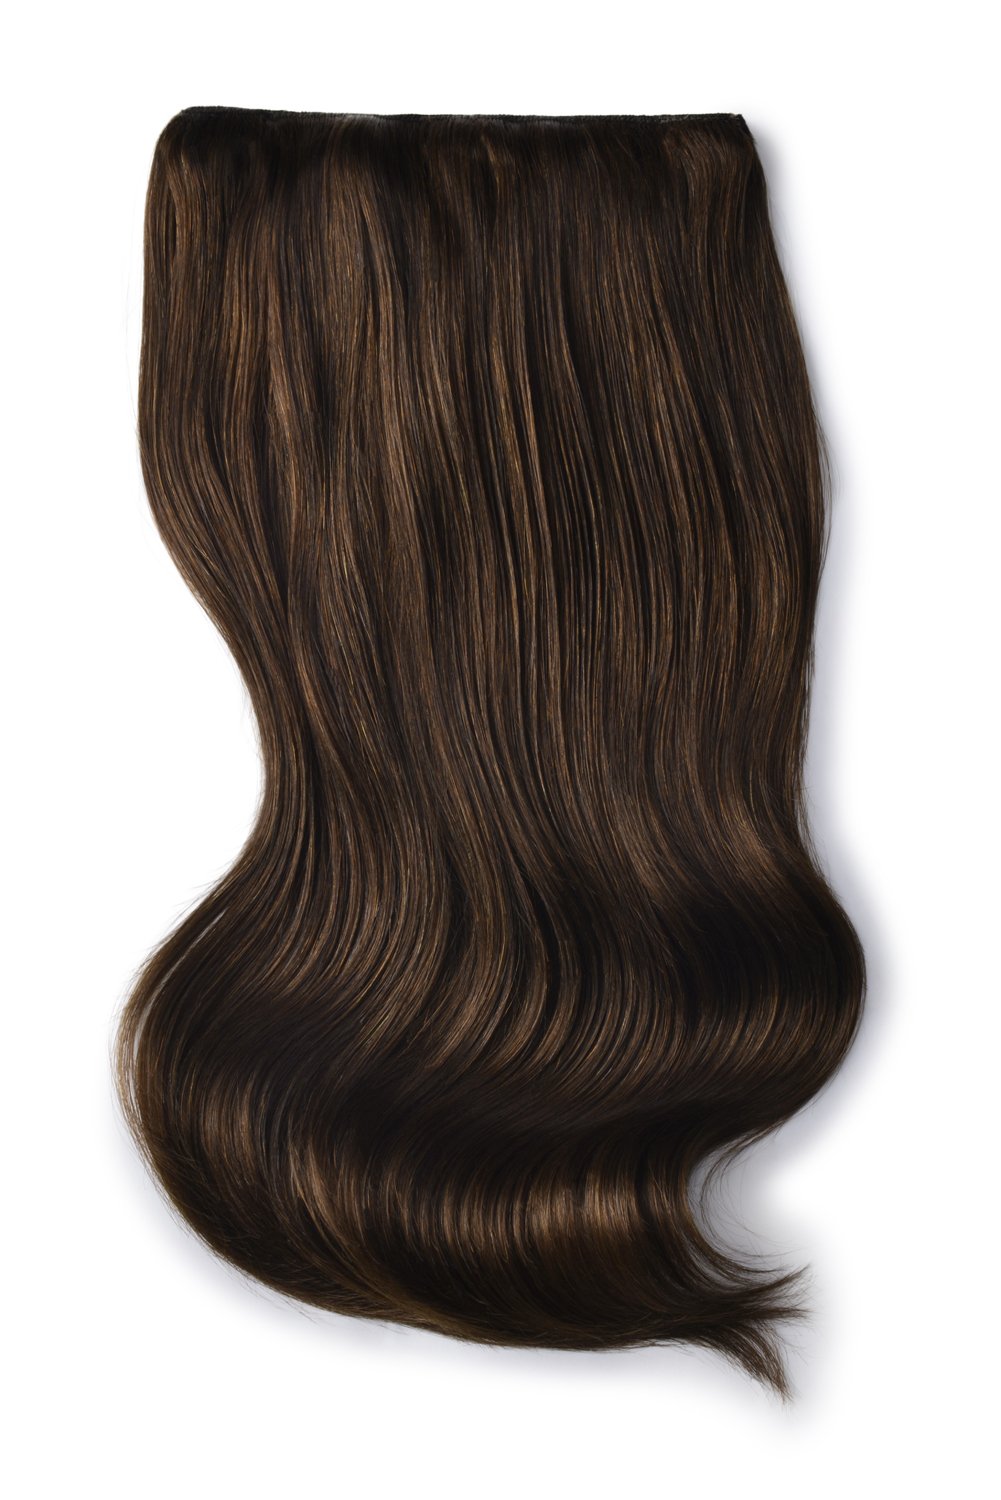 Hair Extensions by Cliphair US - Medium Brown Extra Thick Extensions